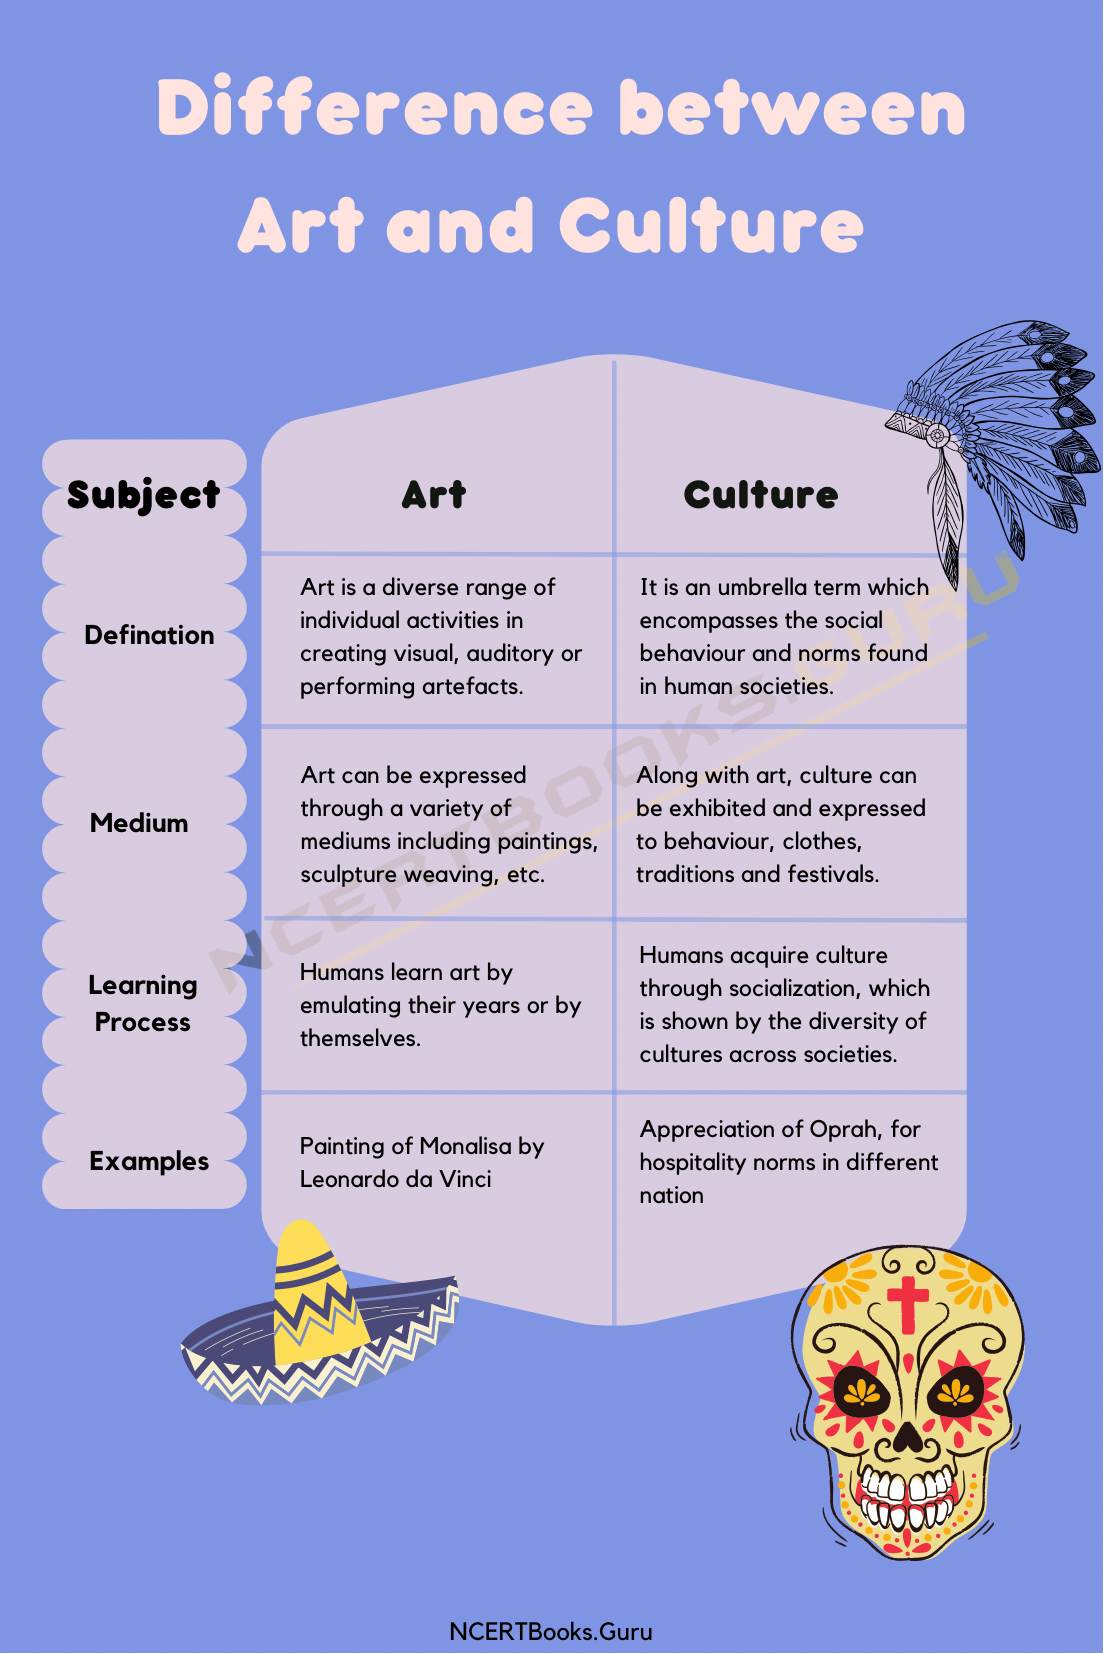 Difference Between Art and Culture 2